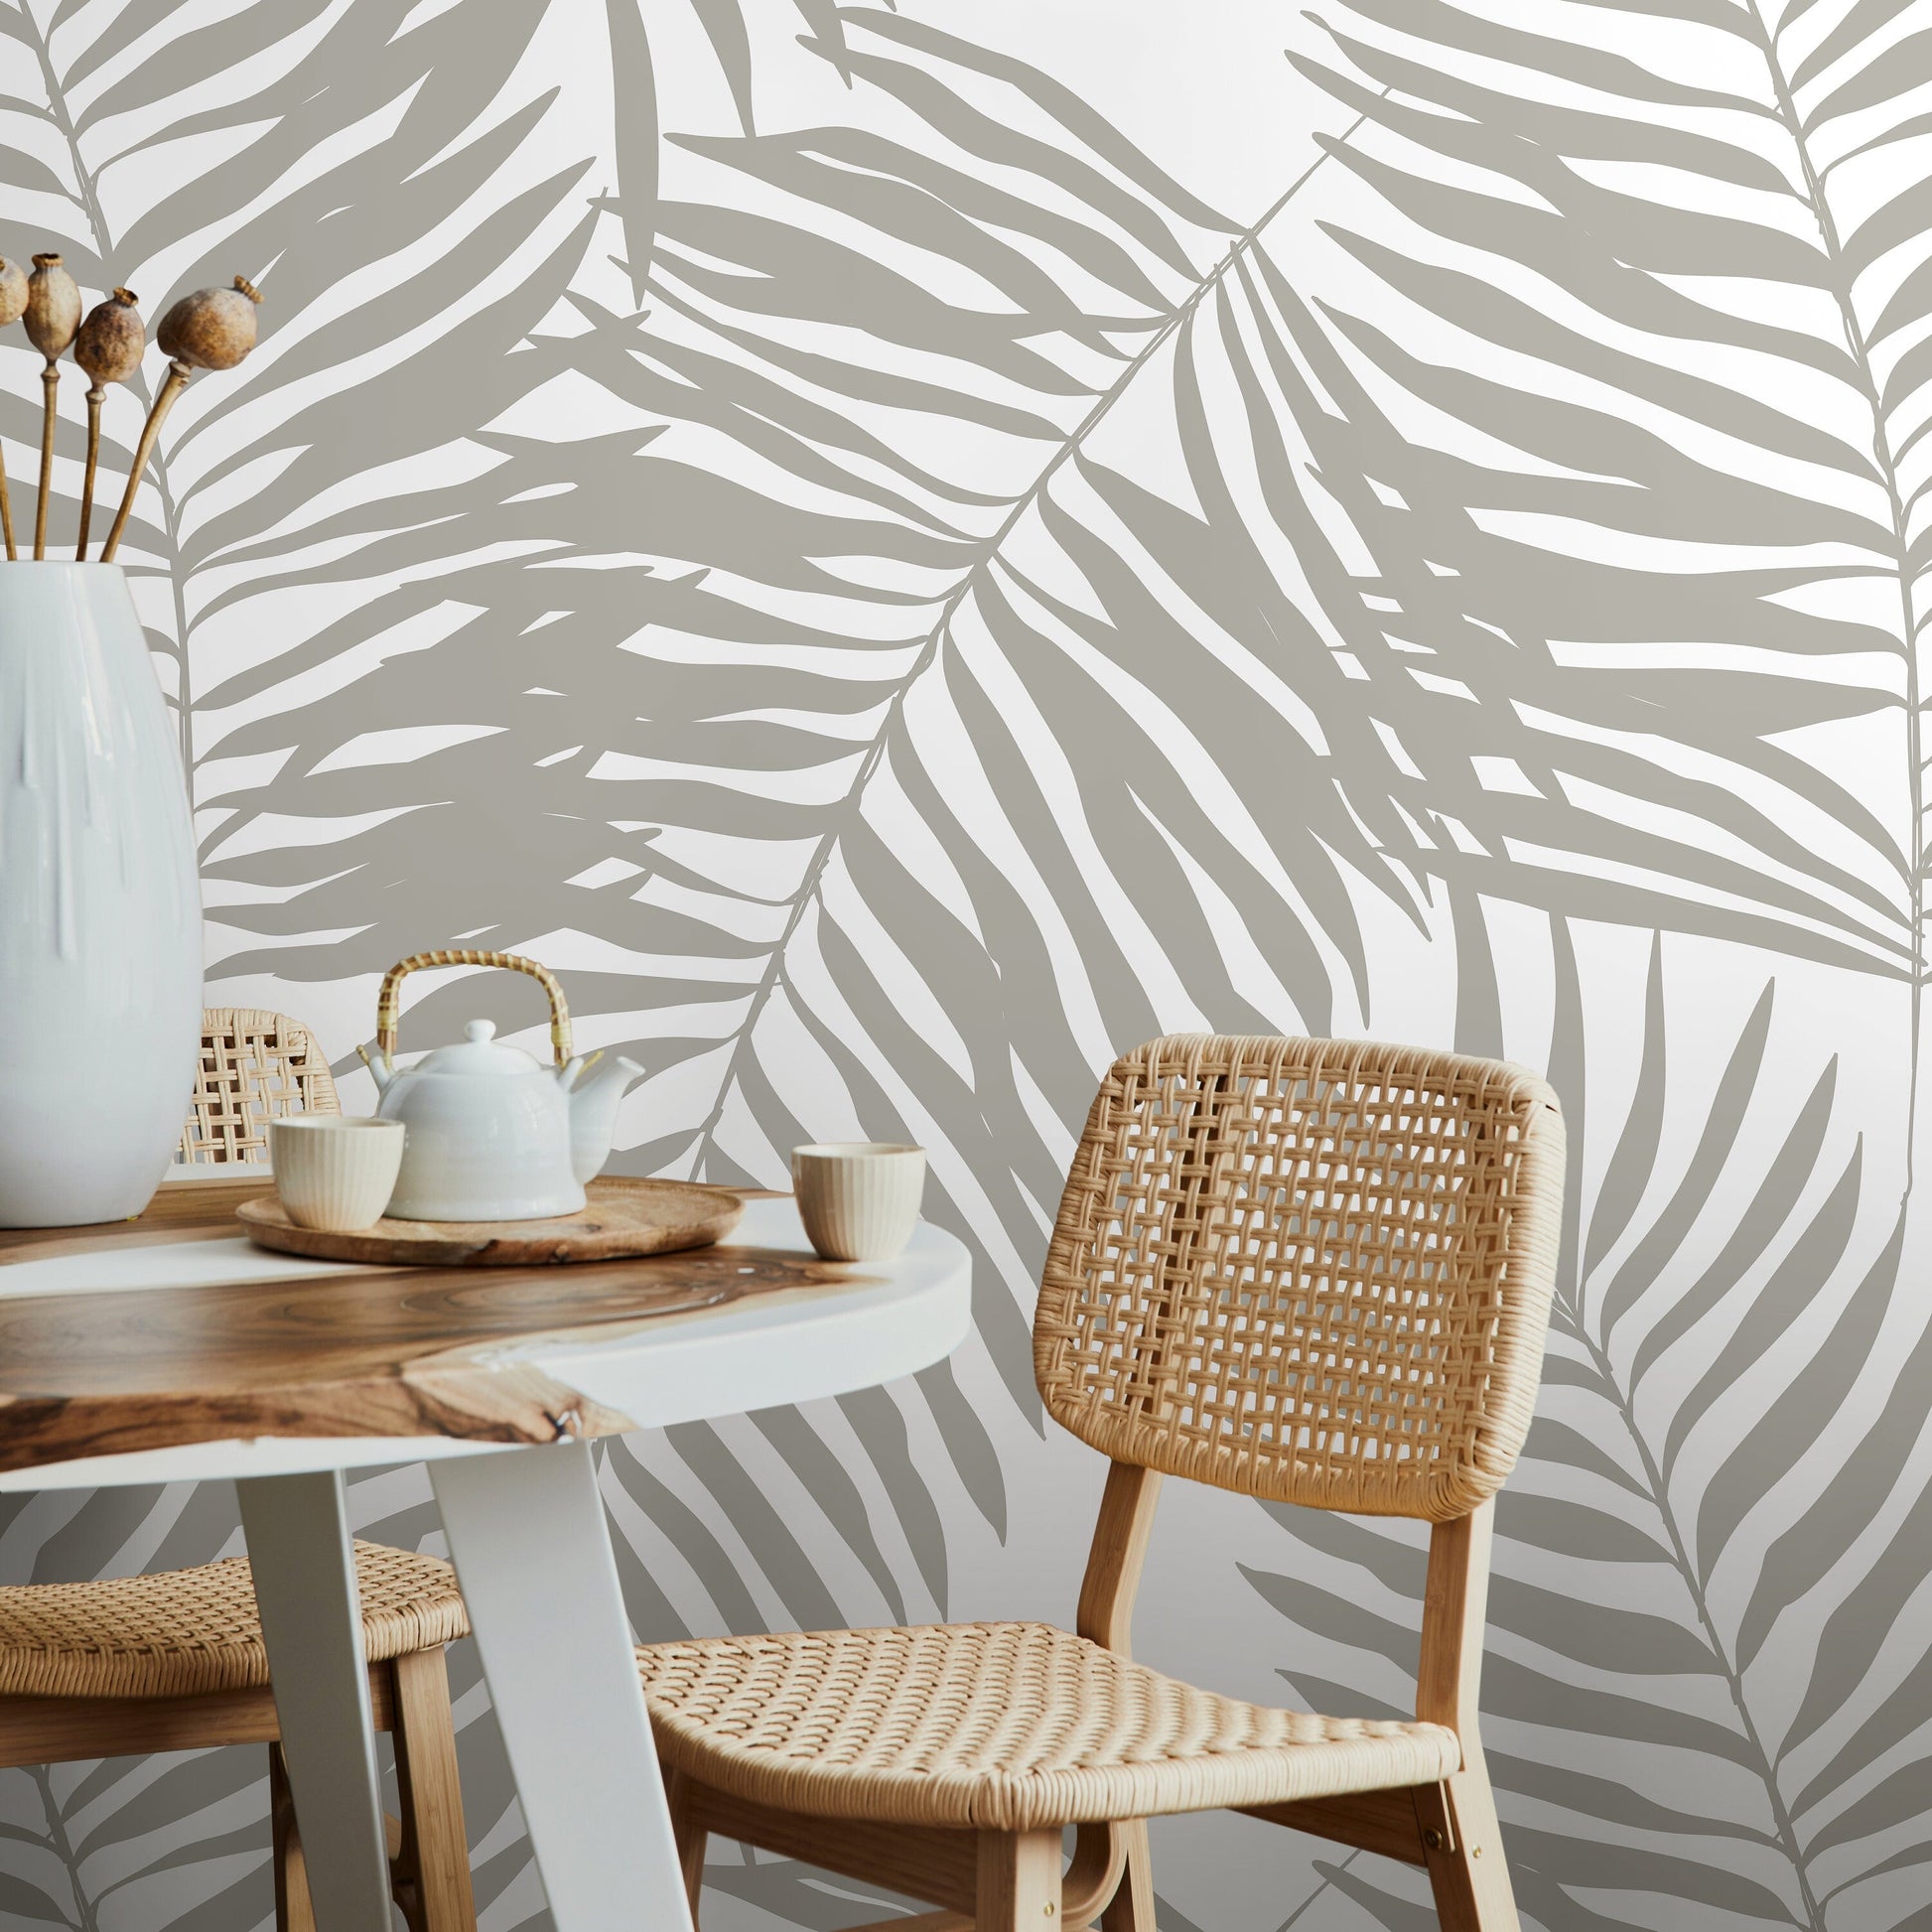 Wallpaper Peel and Stick Wallpaper Removable Wallpaper Home Decor Wall Art Wall Decor Room Decor / Gray Tropical Leaves Wallpaper - C364